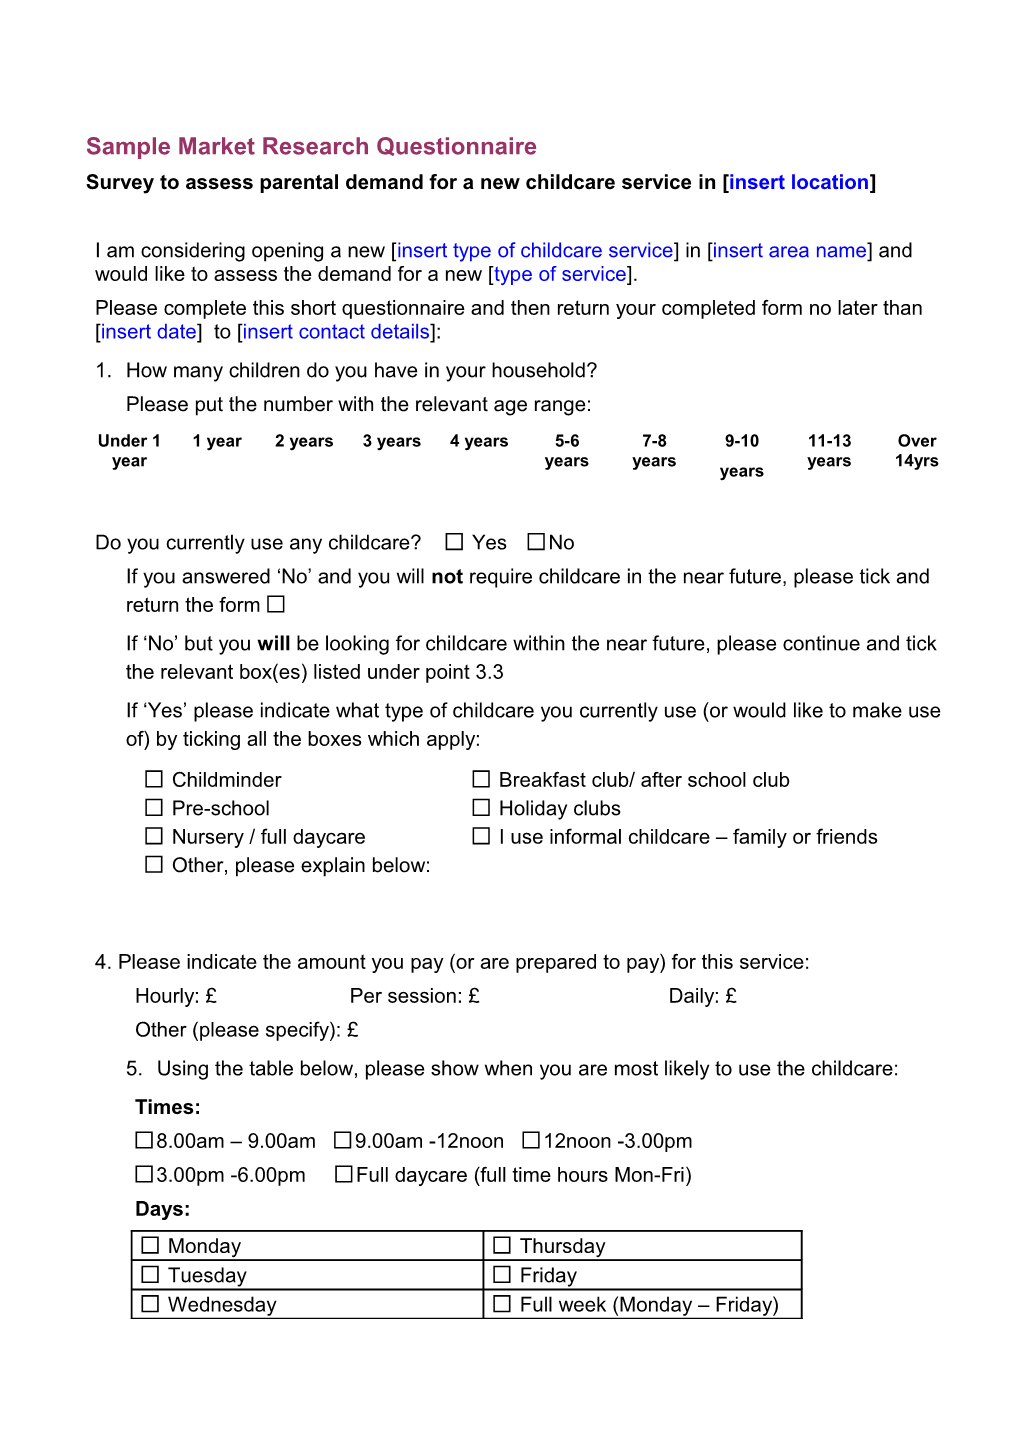 Survey to Assess Parental Demand for a New Childcare Servicein Insert Location